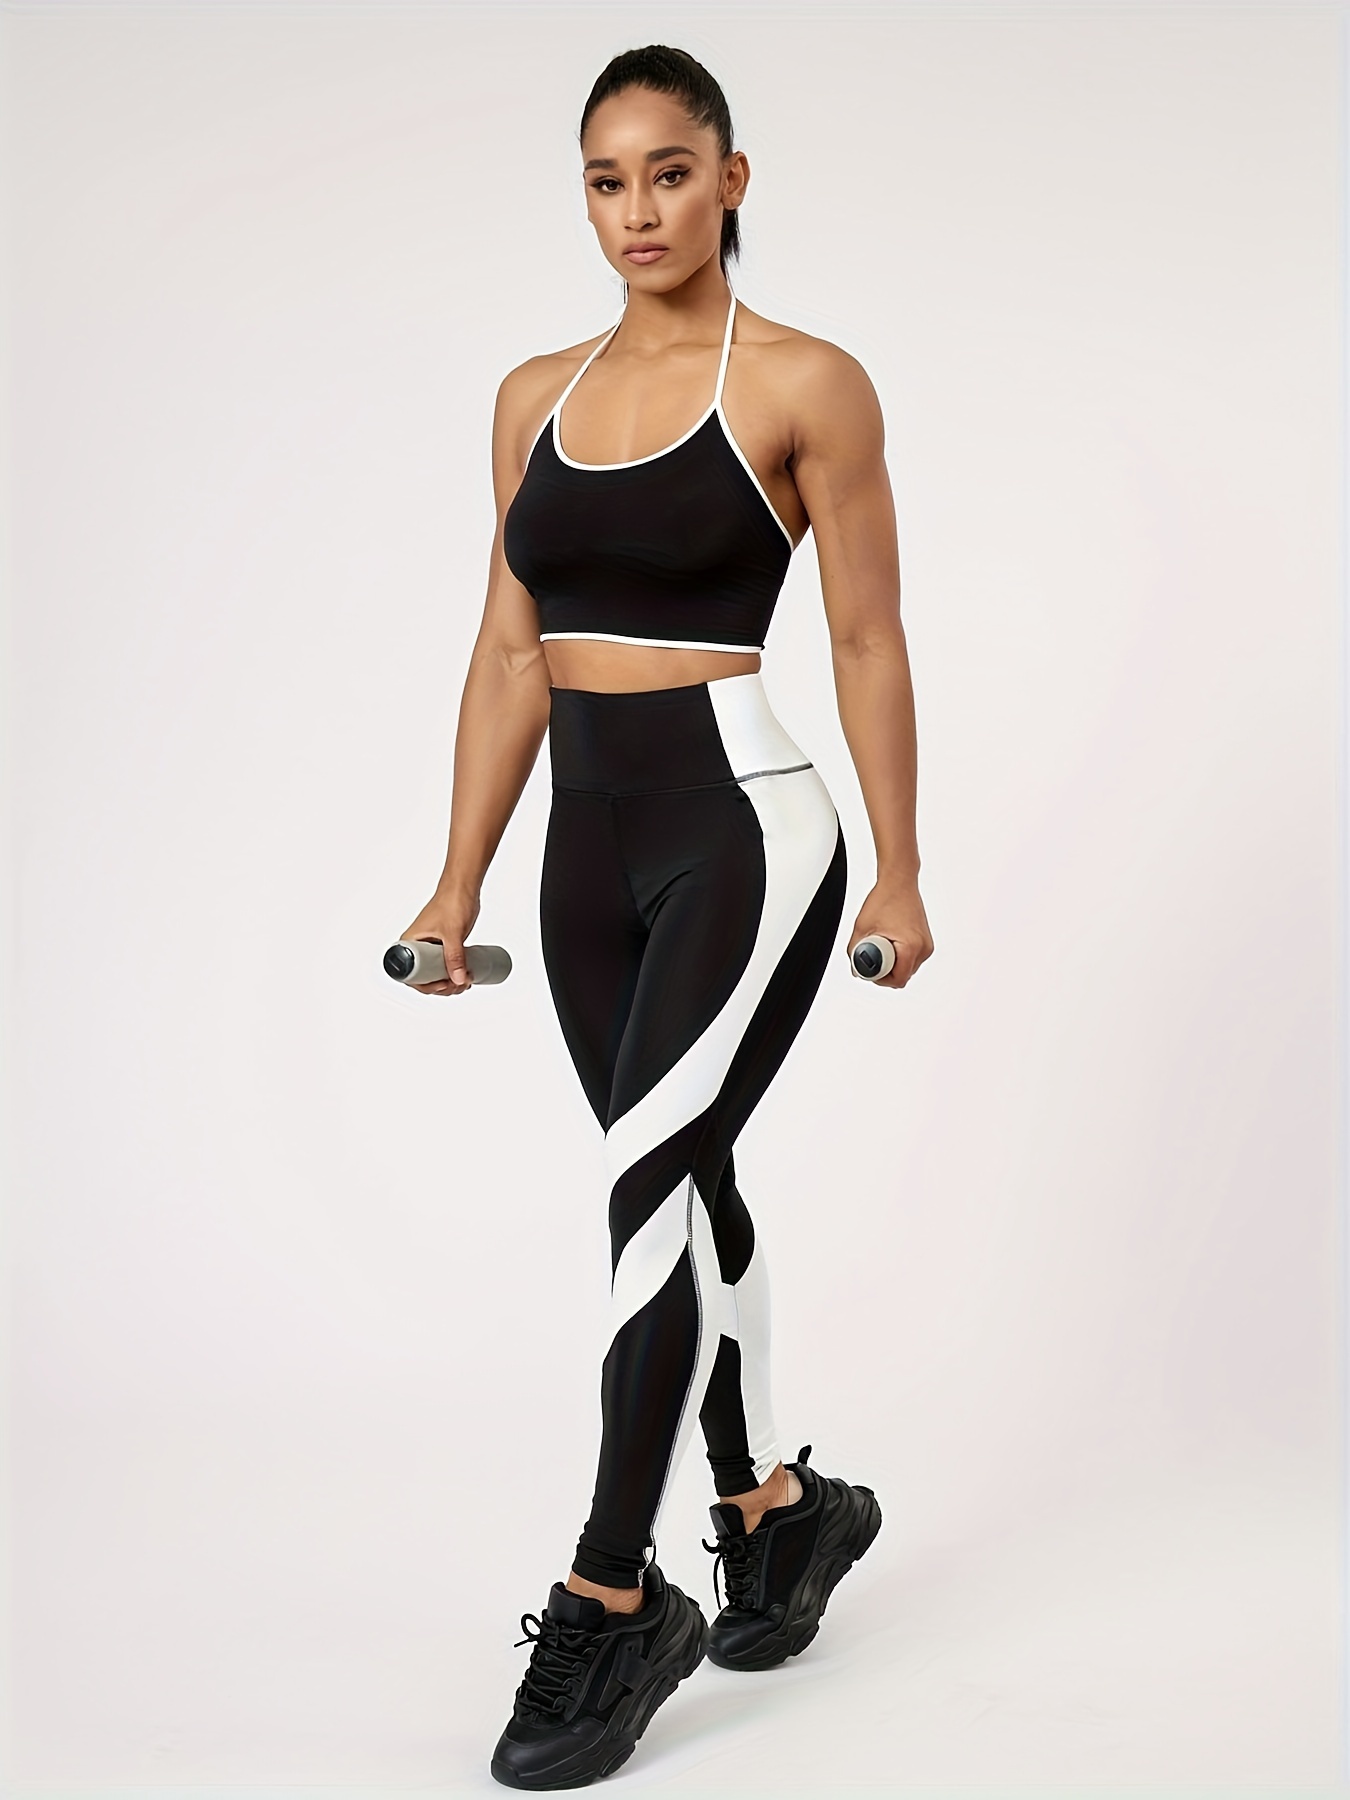 Yoga Pants For Women Women Fitness Exercise Stretch High Waist